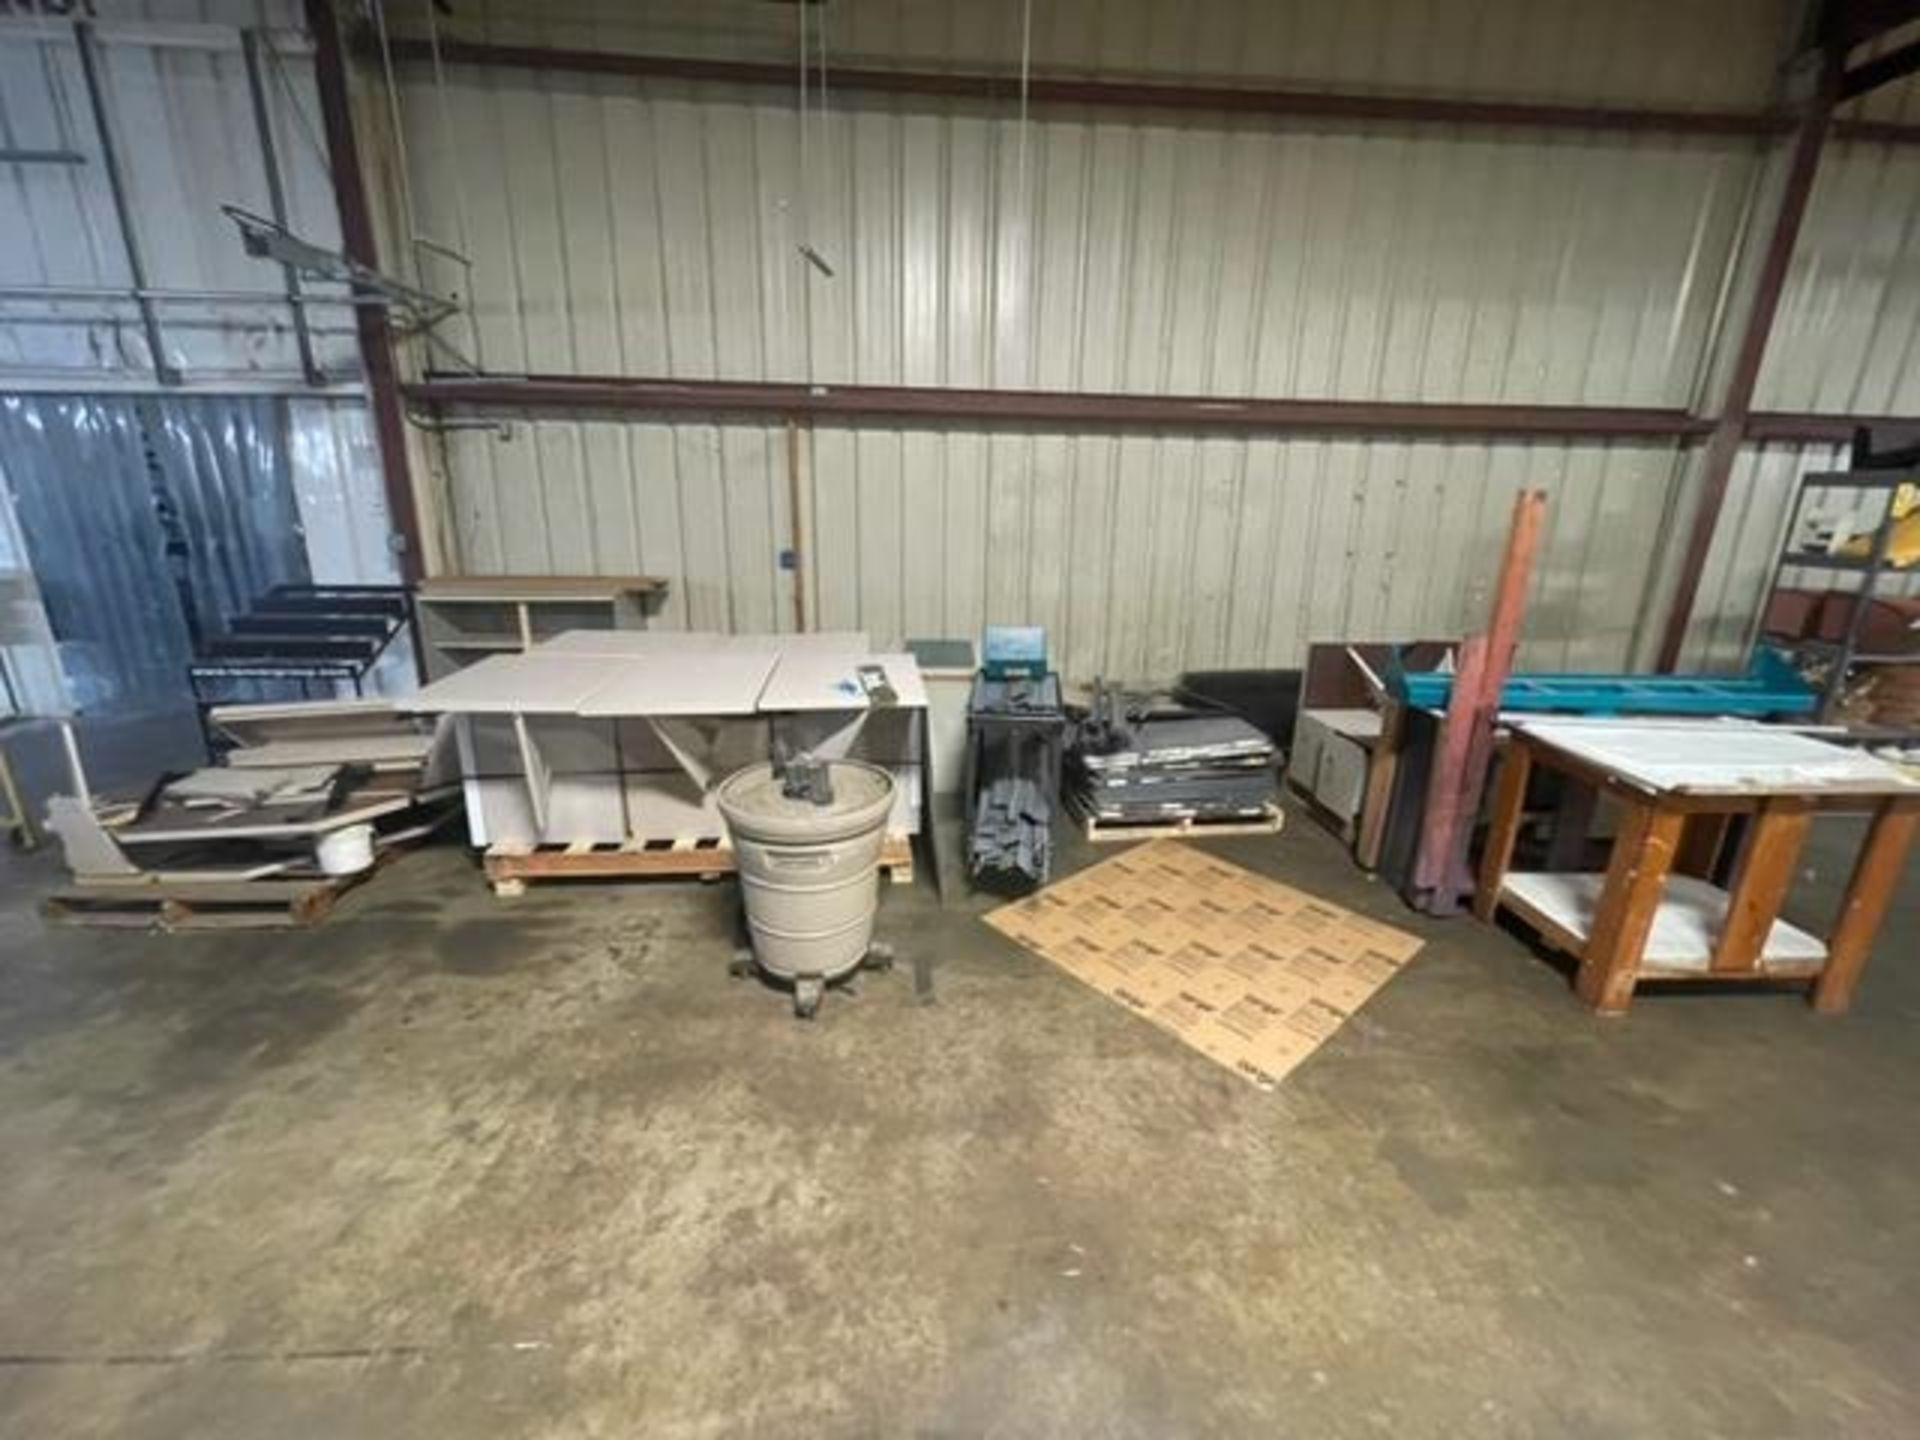 Miscellaneous disassembled shelving tables, metal cabinets, fencing, craftsman vac